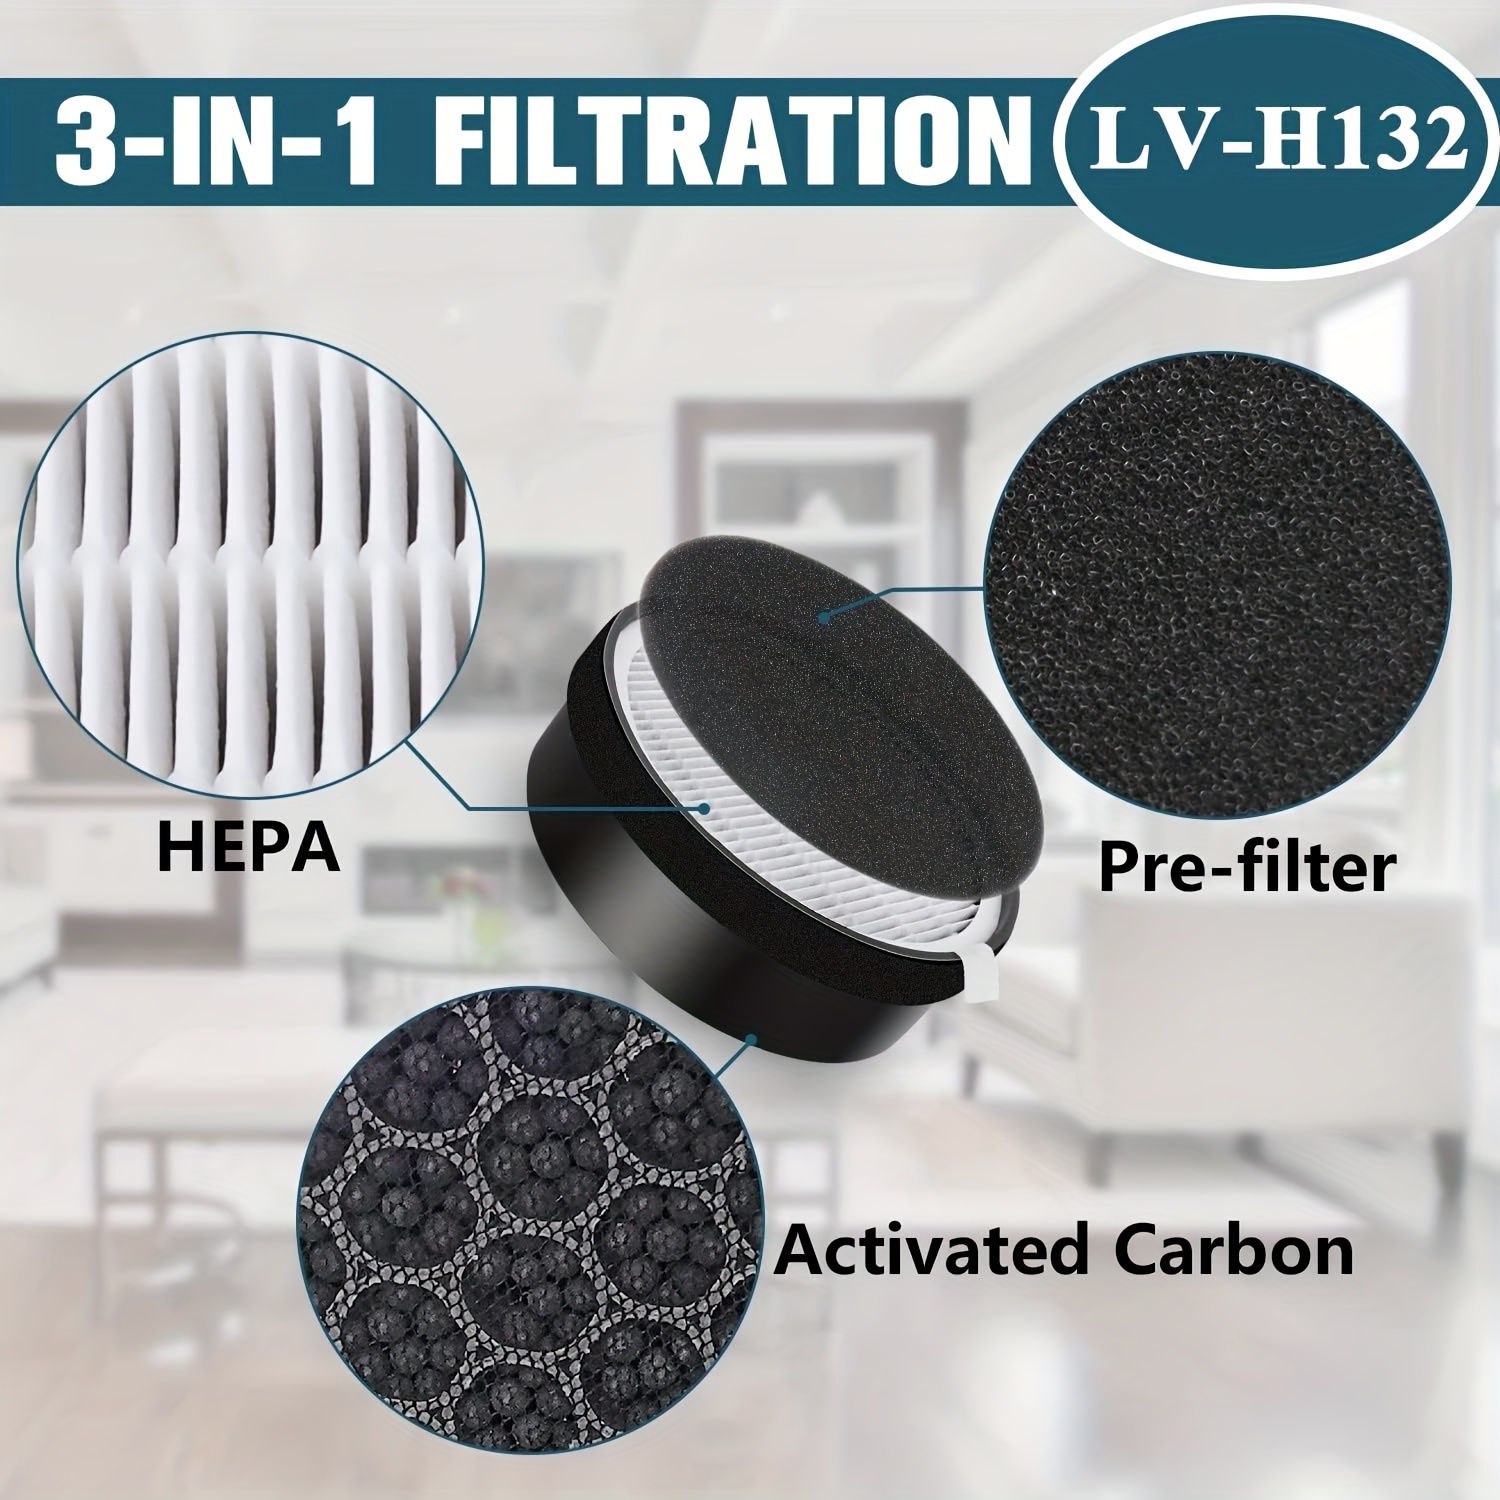 LV-H132 Air Purifier Filter Replacement for LEVOIT, 3-in-1 Pre-Filter, H13  True HEPA Filter, Activated Carbon Filter, Replaces Part # LV-H132-RF, 2